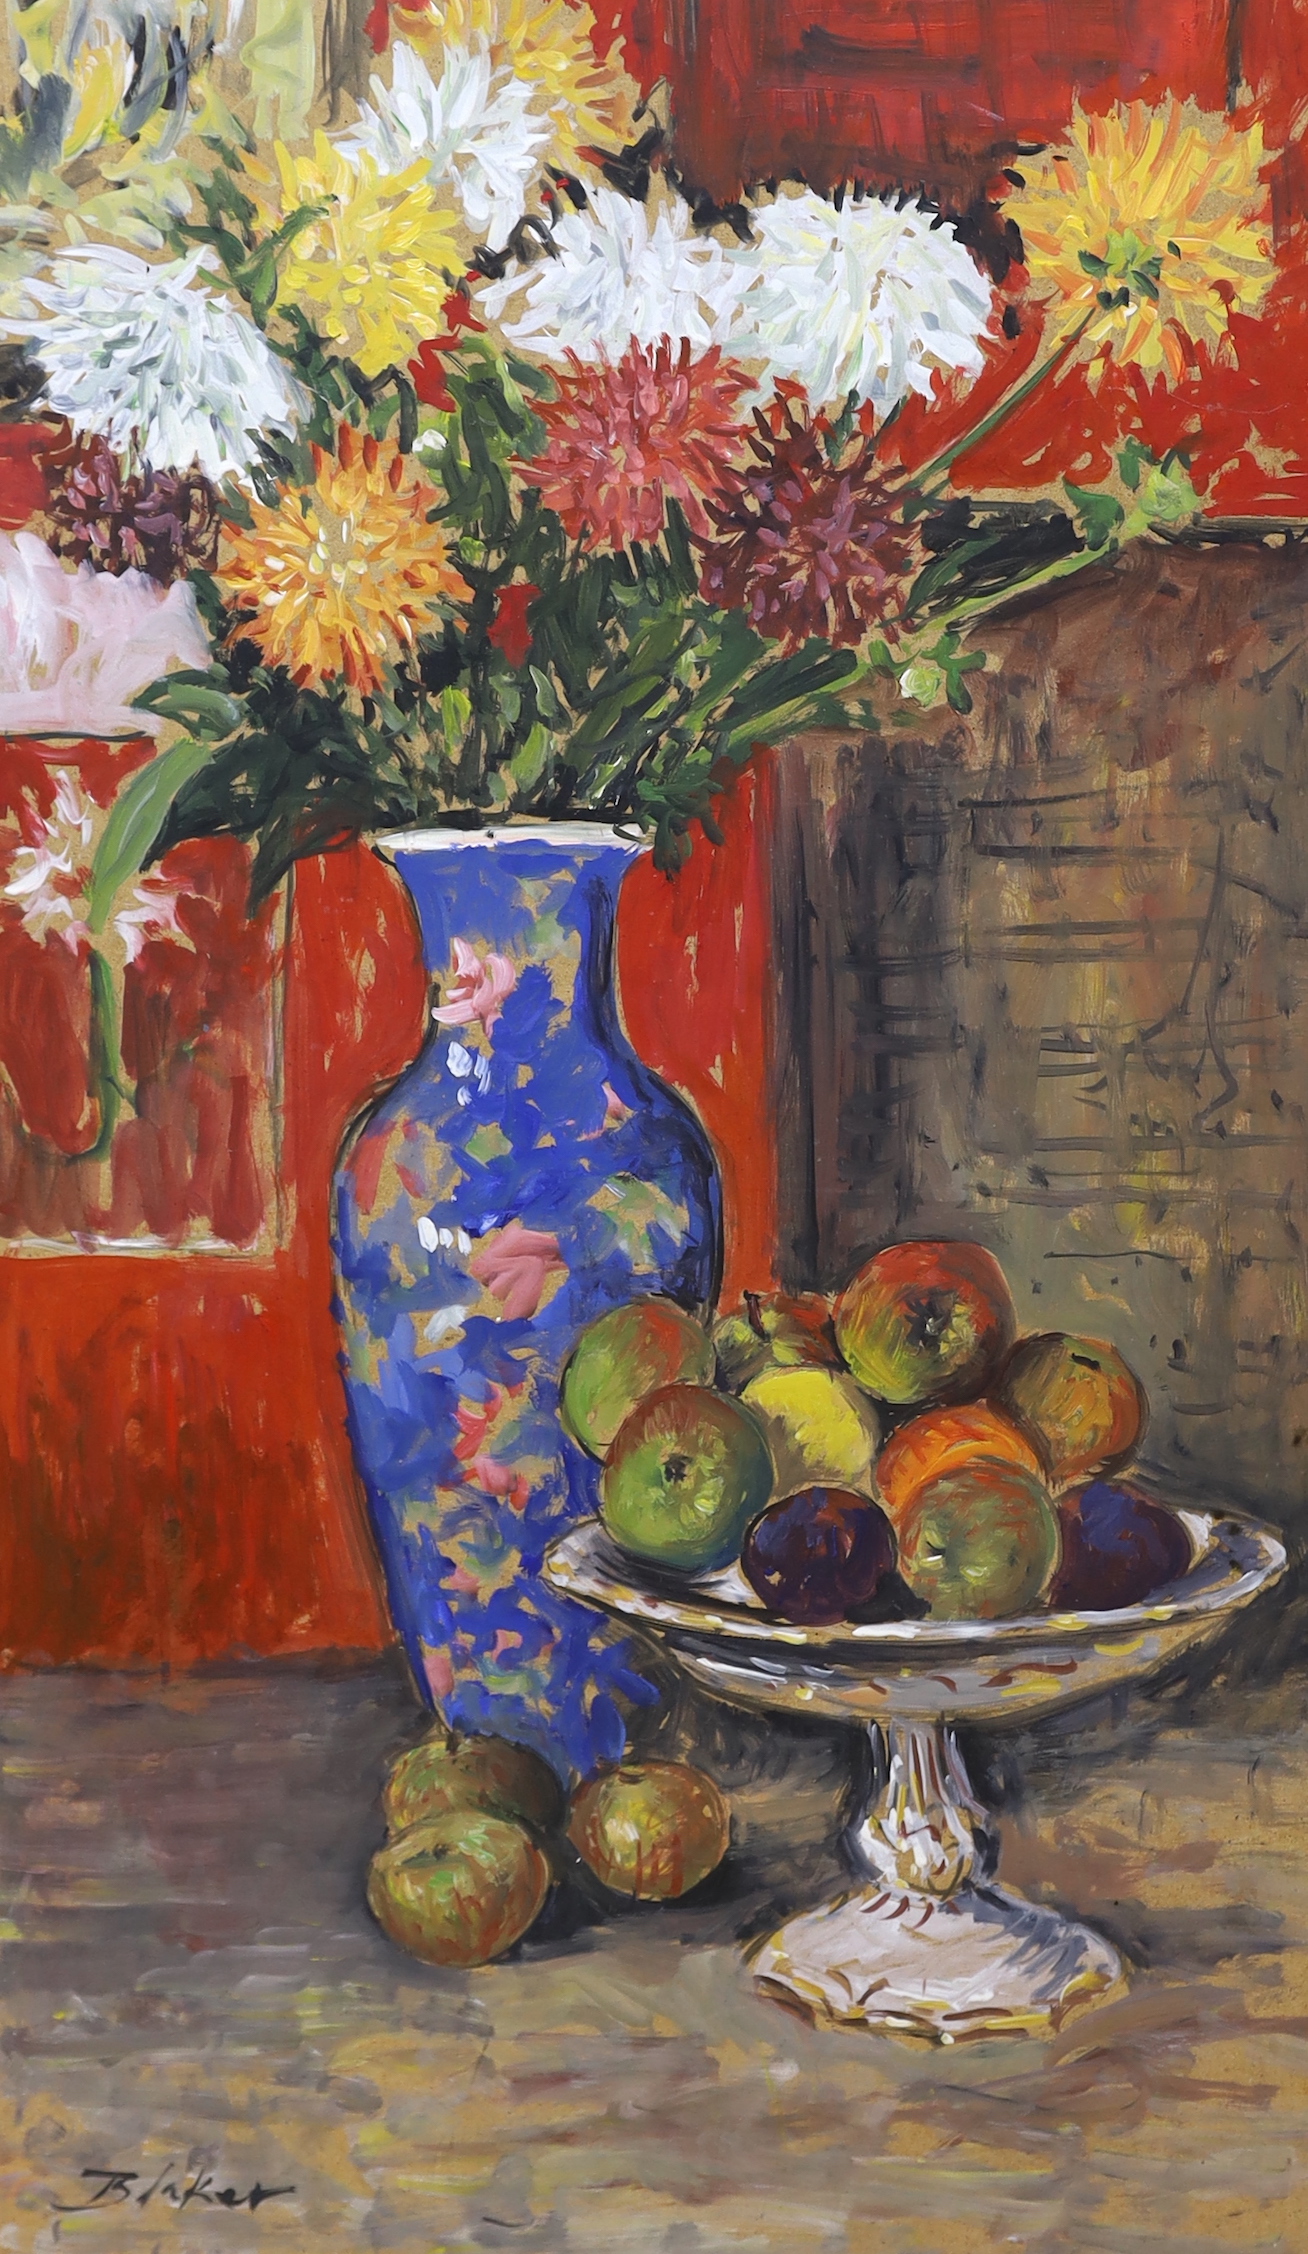 Michael John Blaker (1928-2018), two oils on board, Still life of fruit & flowers and vintage stove, signed, largest 76 x 46cm unframed